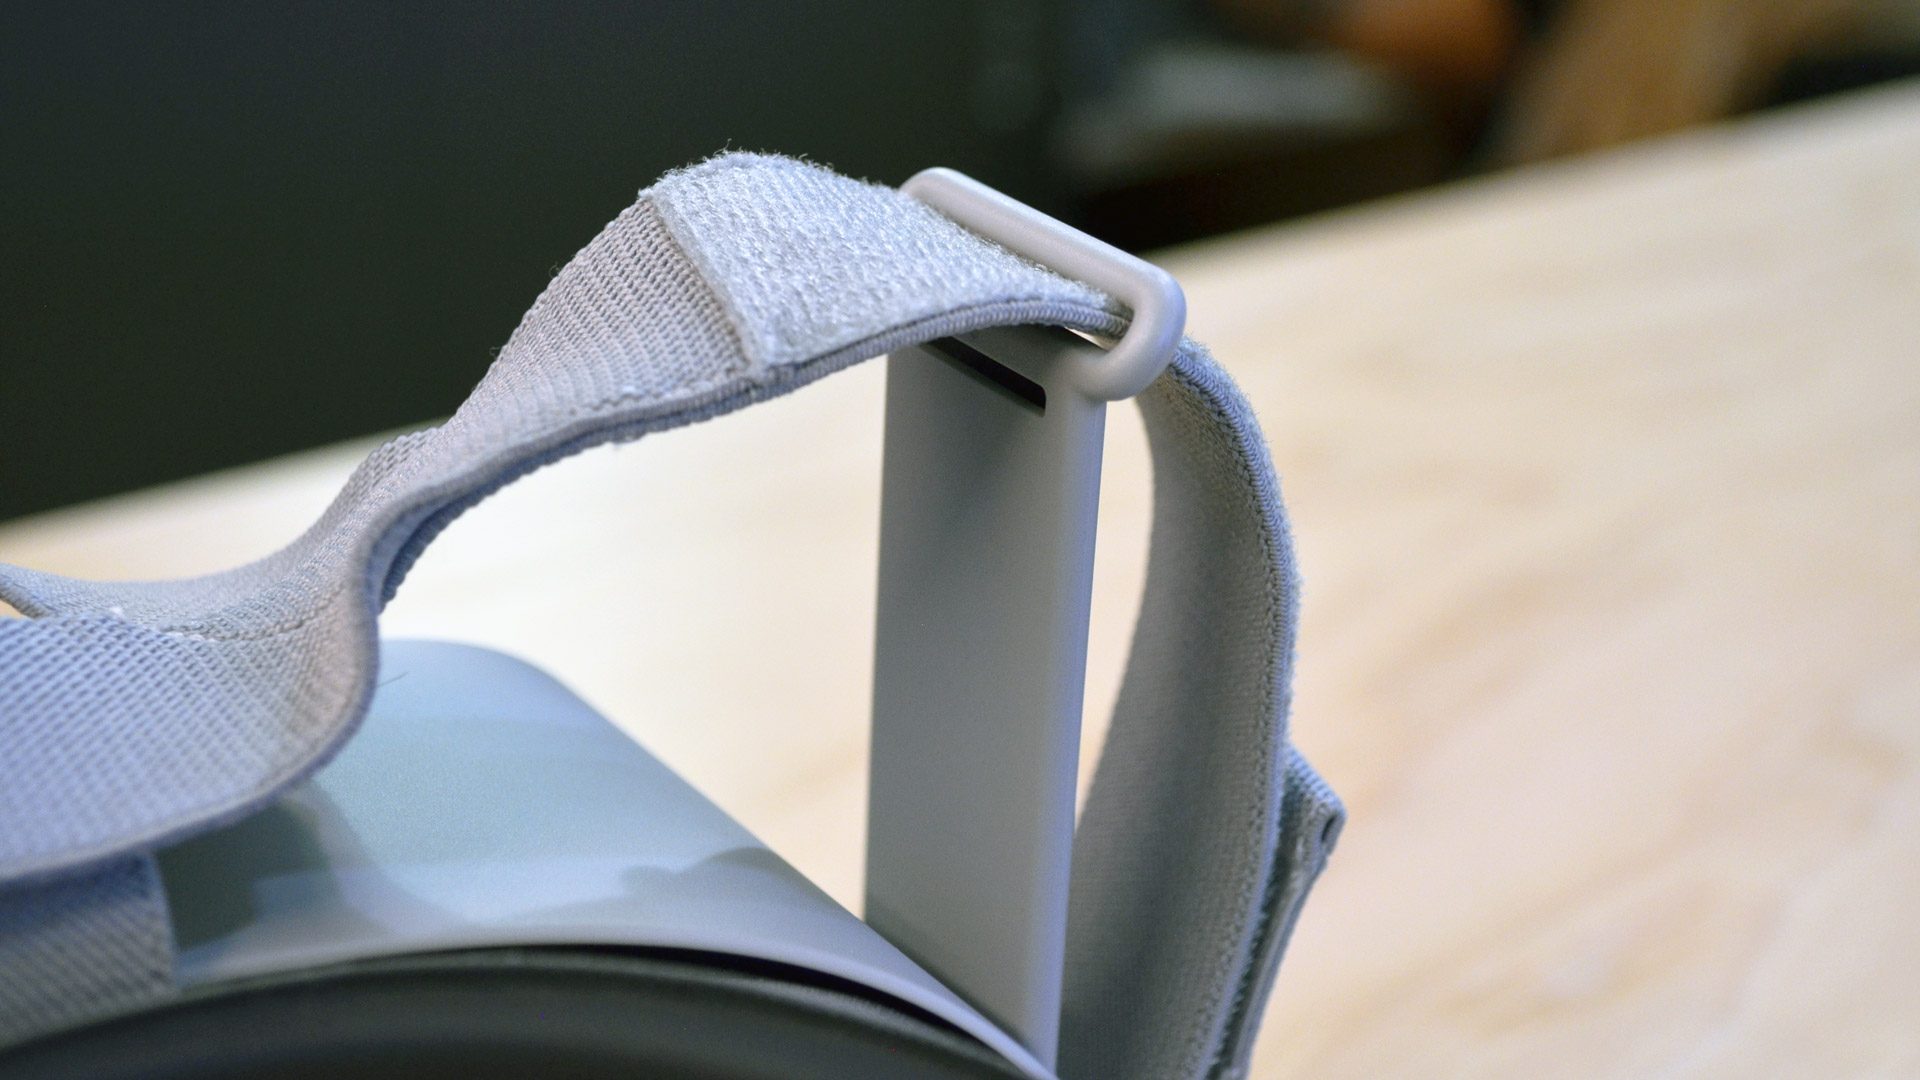 GDC Our First Look at Oculus Go – for the Accessibility Sweet Spot